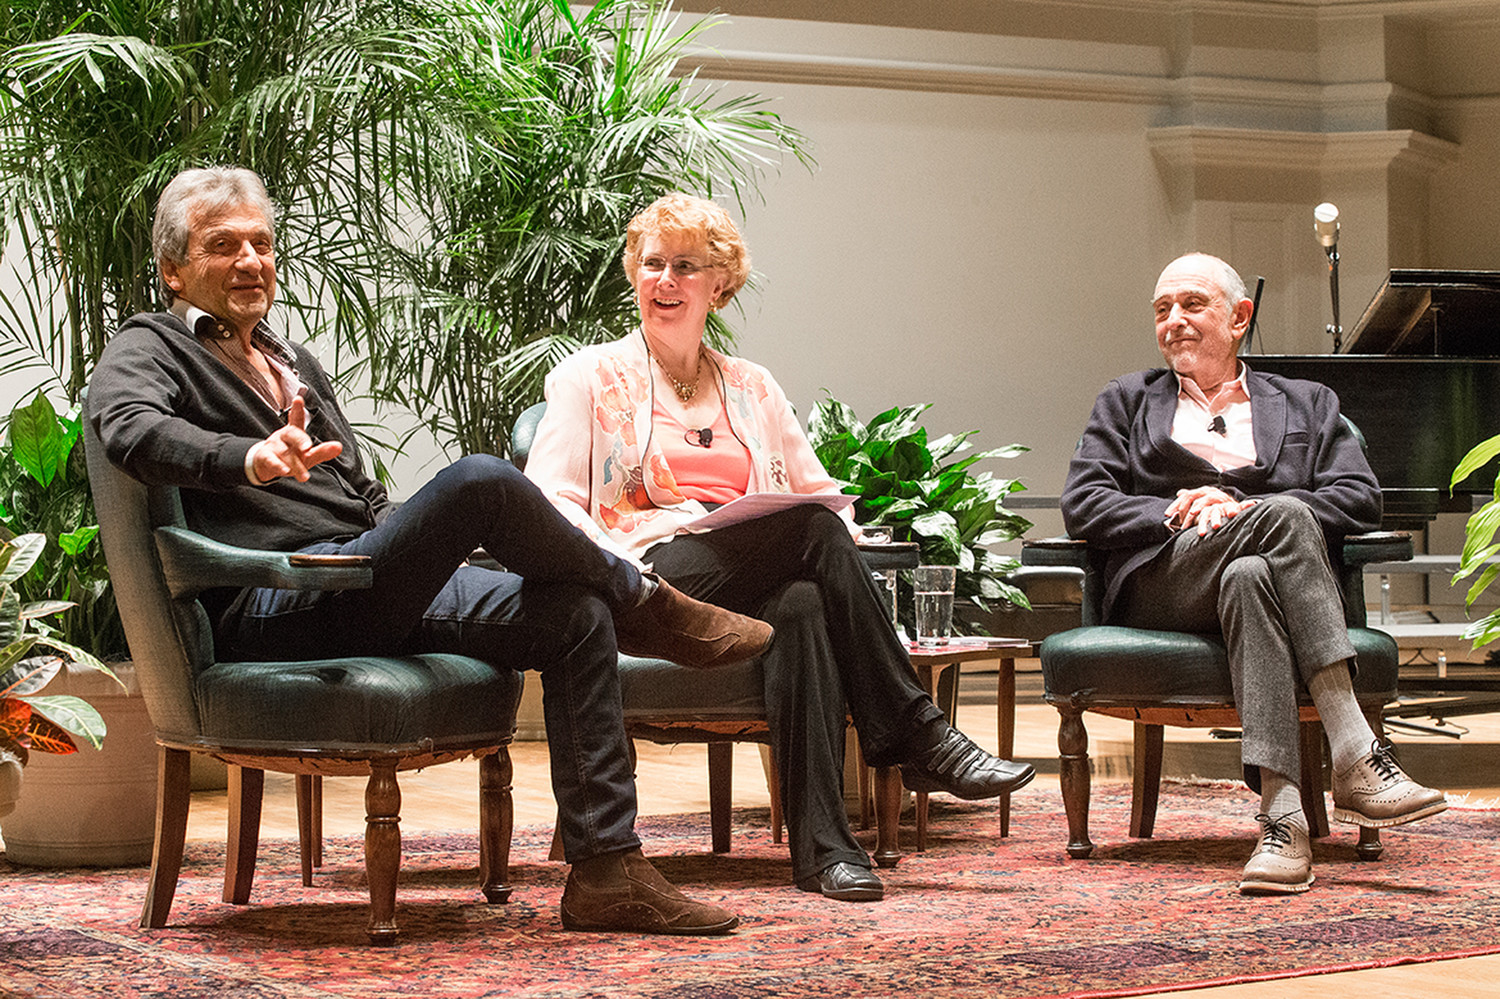 Funds from the Arts Endowment supported a three-day residency with composer Claude-Michel Schönberg and lyricist Alain Boublil in February 2017, during which the artists spoke to the University and broader Charlottesville communities about their creative process, moderated by Professor Emeritus Marva Barnett.